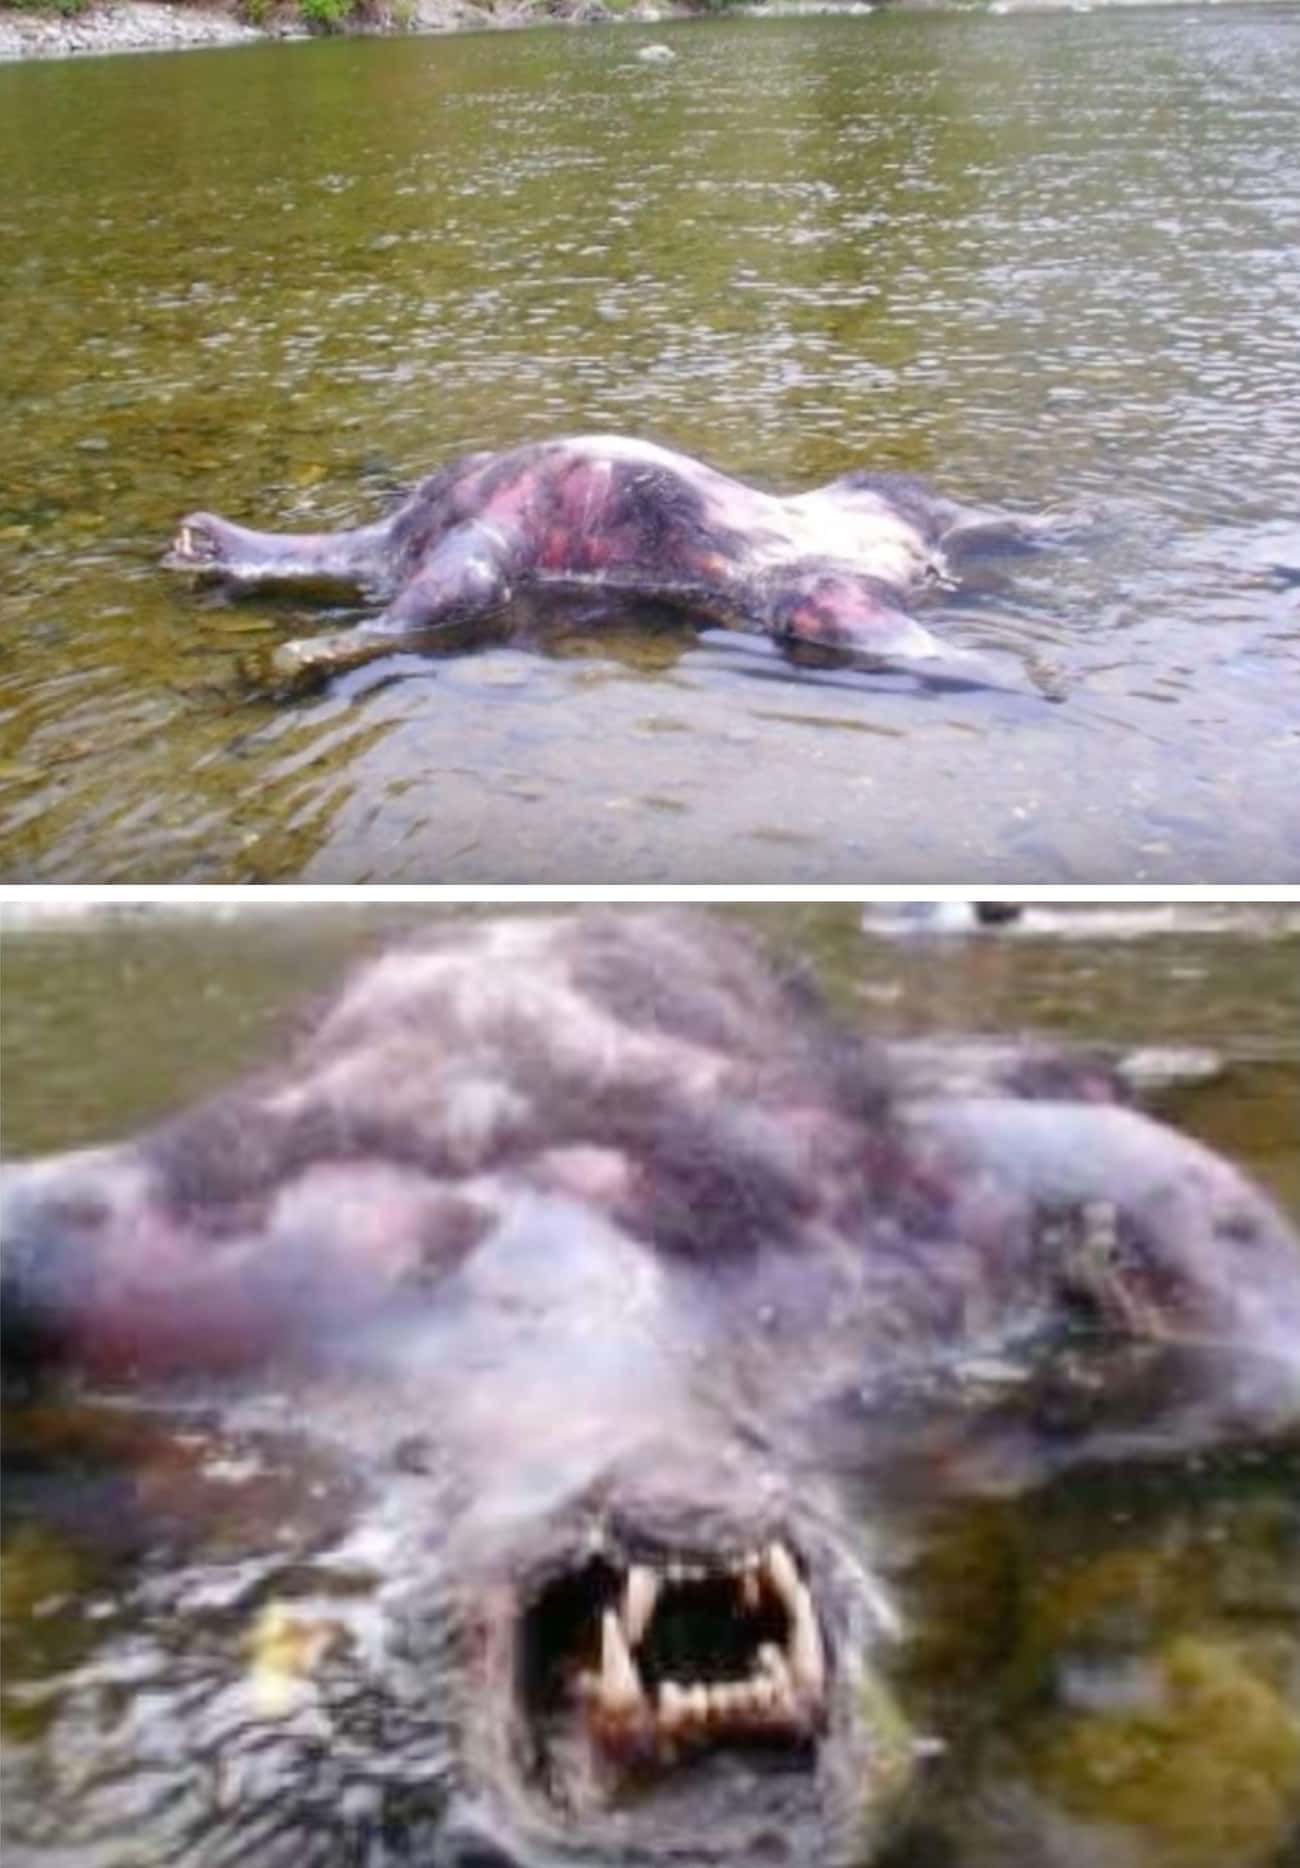 This Photo Claims To Show A Dead Werewolf